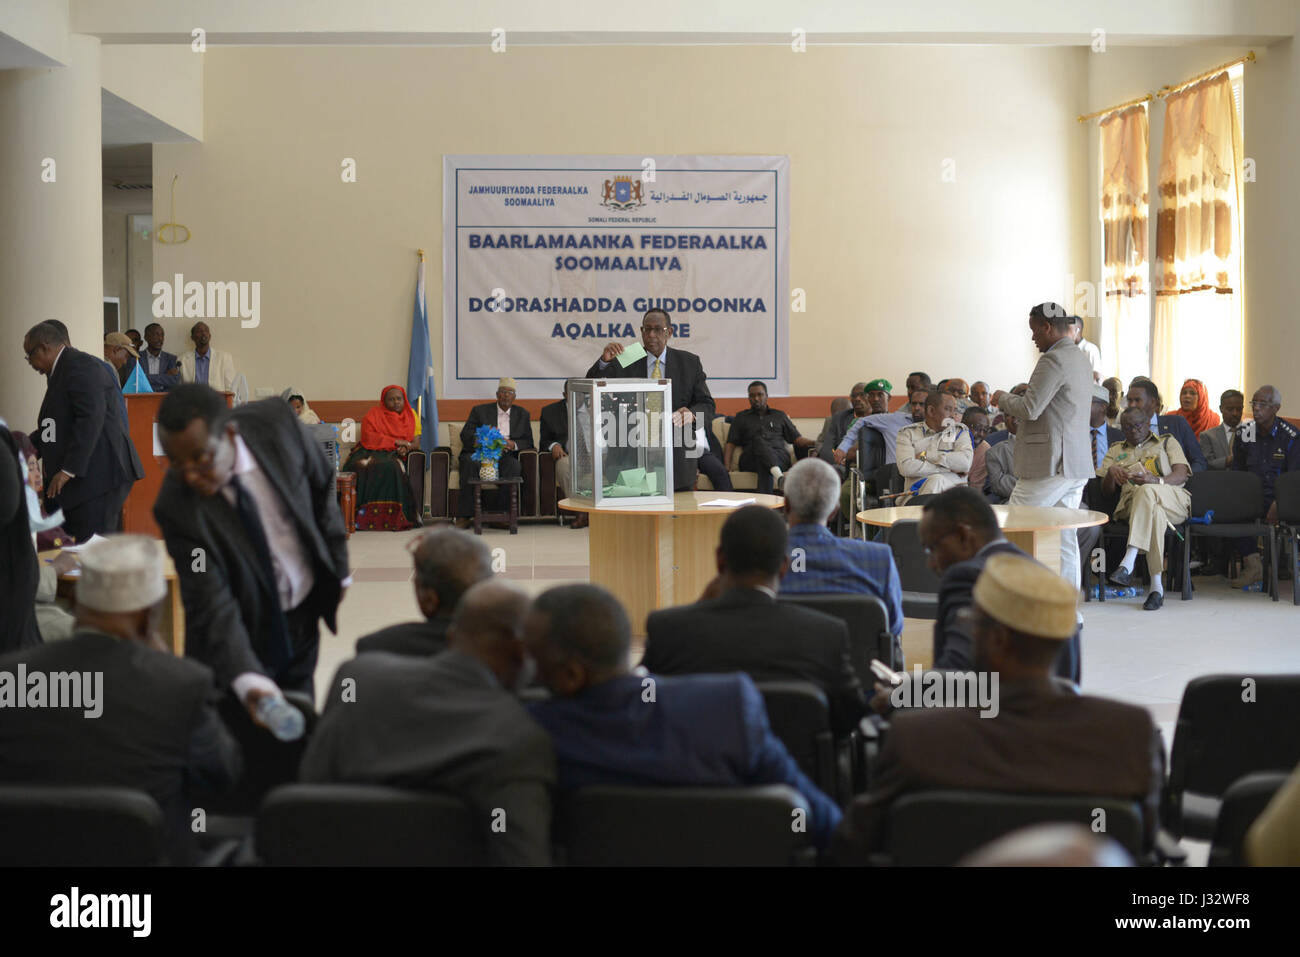 Senators belonging to the Upper House cast their votes to determine the Speaker of the Upper House, as well as the two Deputy Speakers, during an election in Mogadishu, Somalia, on January 22, 2017. AMISOM Photo / Tobin Jones Stock Photo